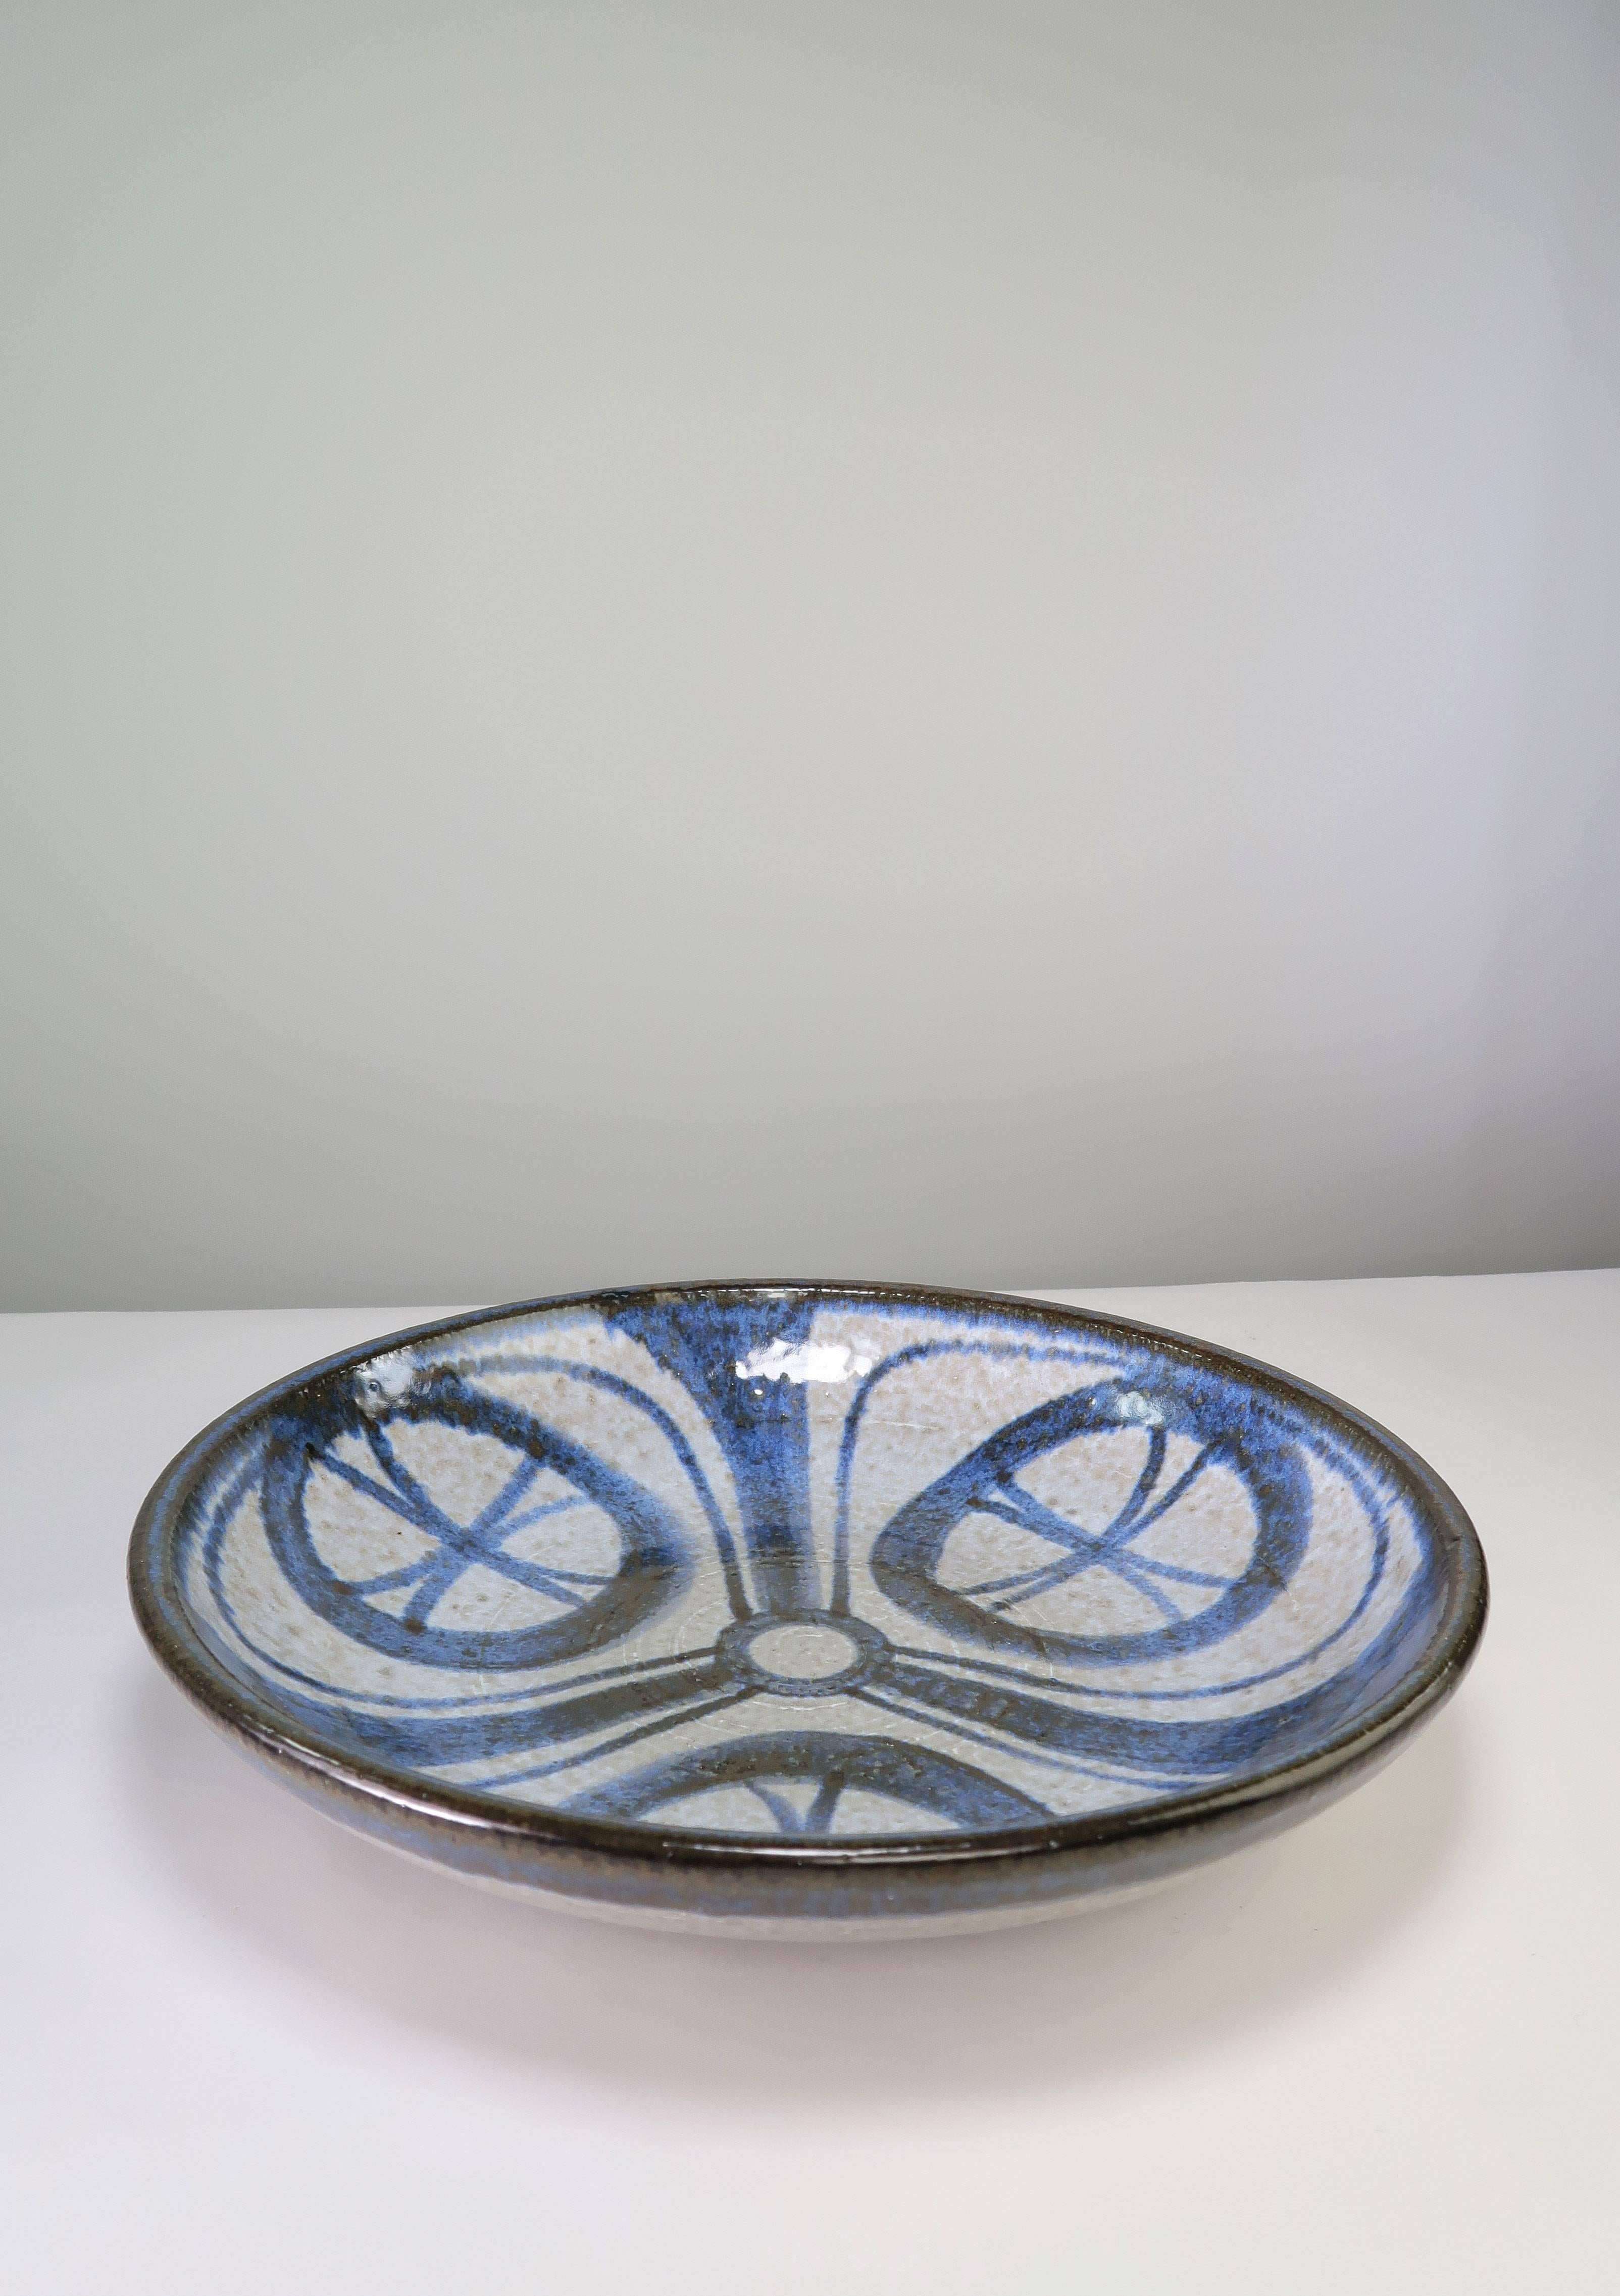 Danish modern handmade ceramic bowl, centrepiece or wall decoration designed by Svend Aage Jensen for Soholm Pottery. Hand decorated with deep blue circle pattern on light grey and dark blue edges. Original label in Danish on front. Stamped on base.